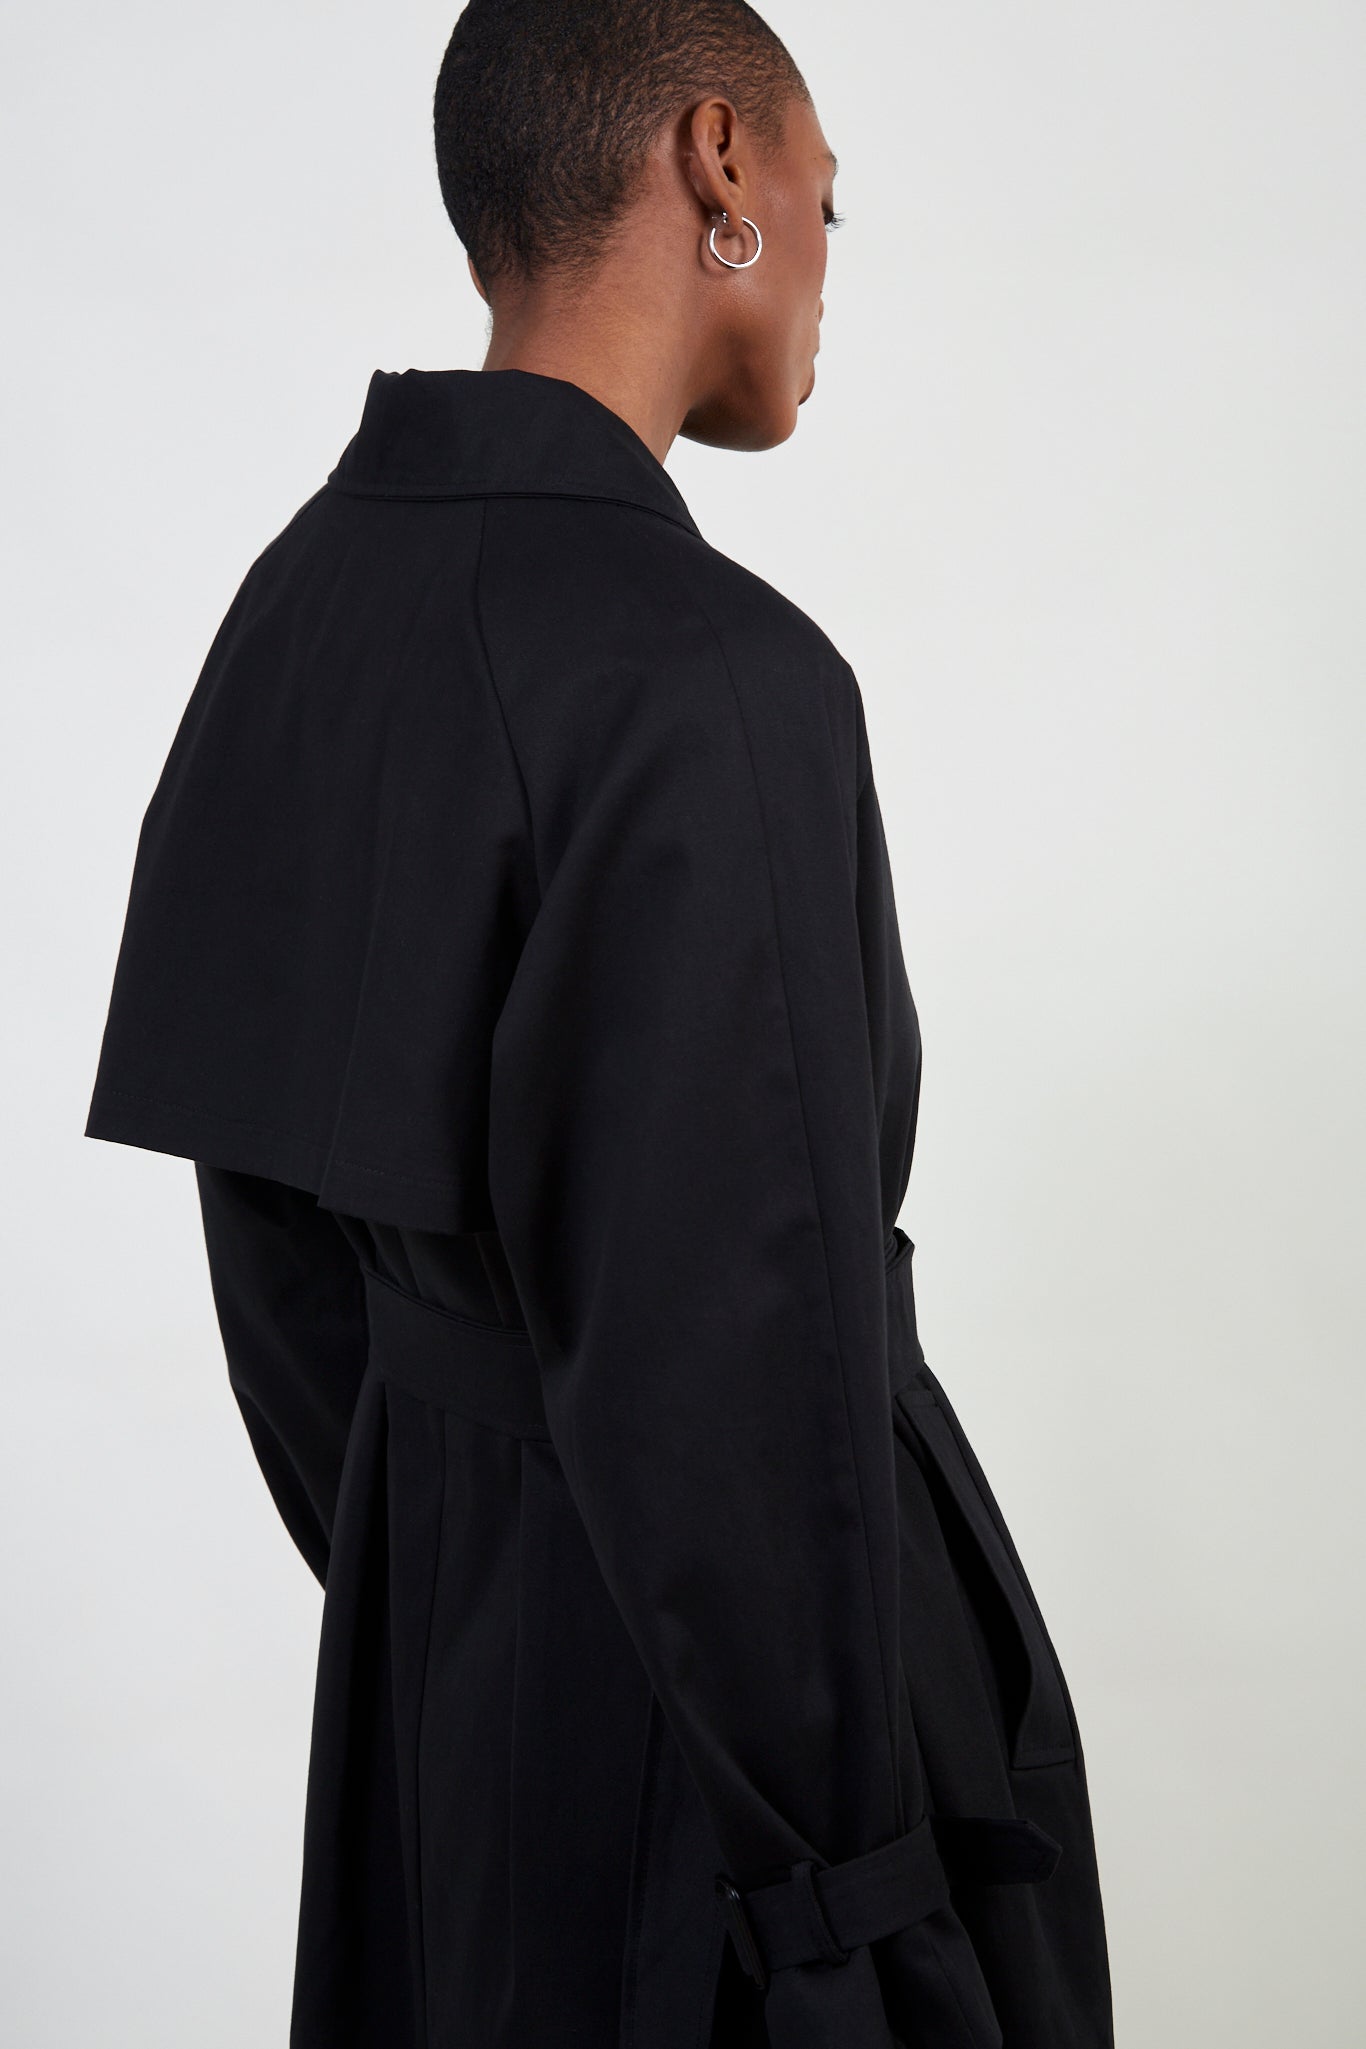 Black single breasted buckle detail trench coat